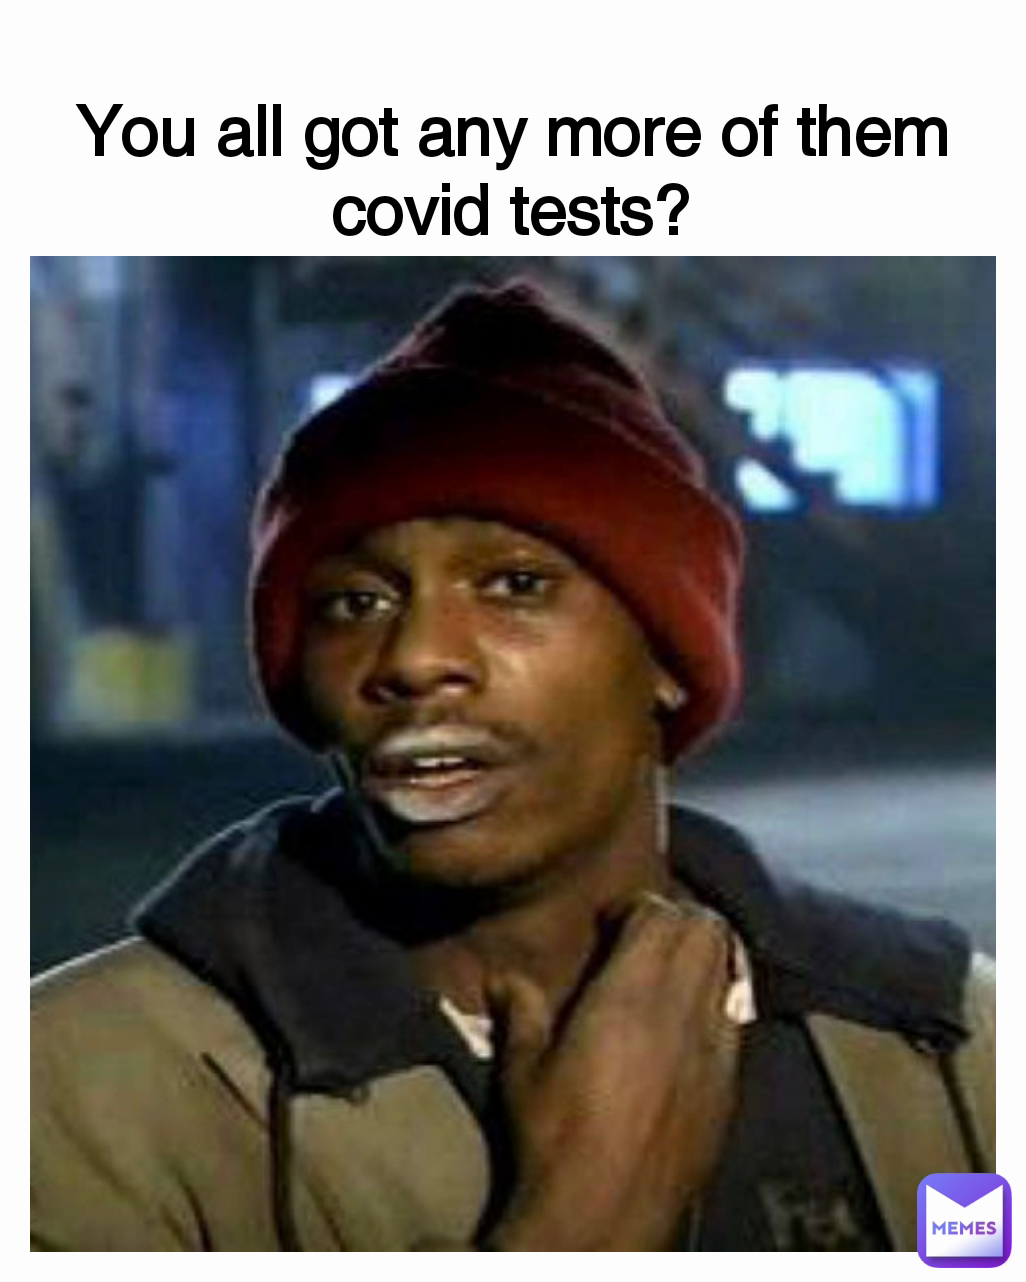 You all got any more of them covid tests?